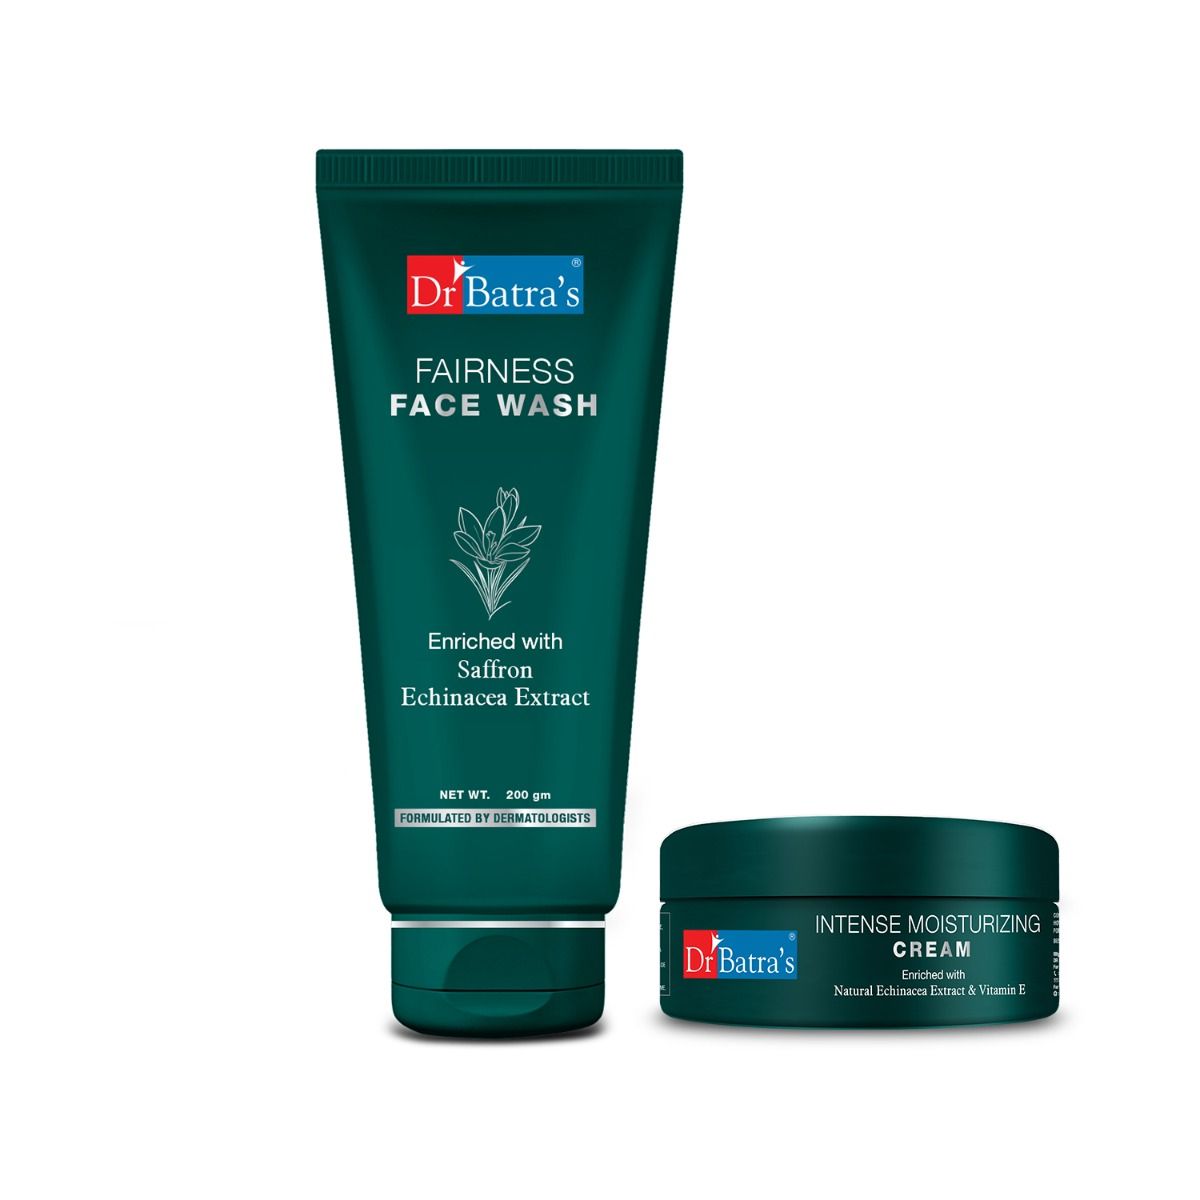     			Dr Batra's Fairness Face Wash - 200g and Intense Moisturizing Cream - 200g, Enriched with Echinacea, Safflower (Pack of 2)